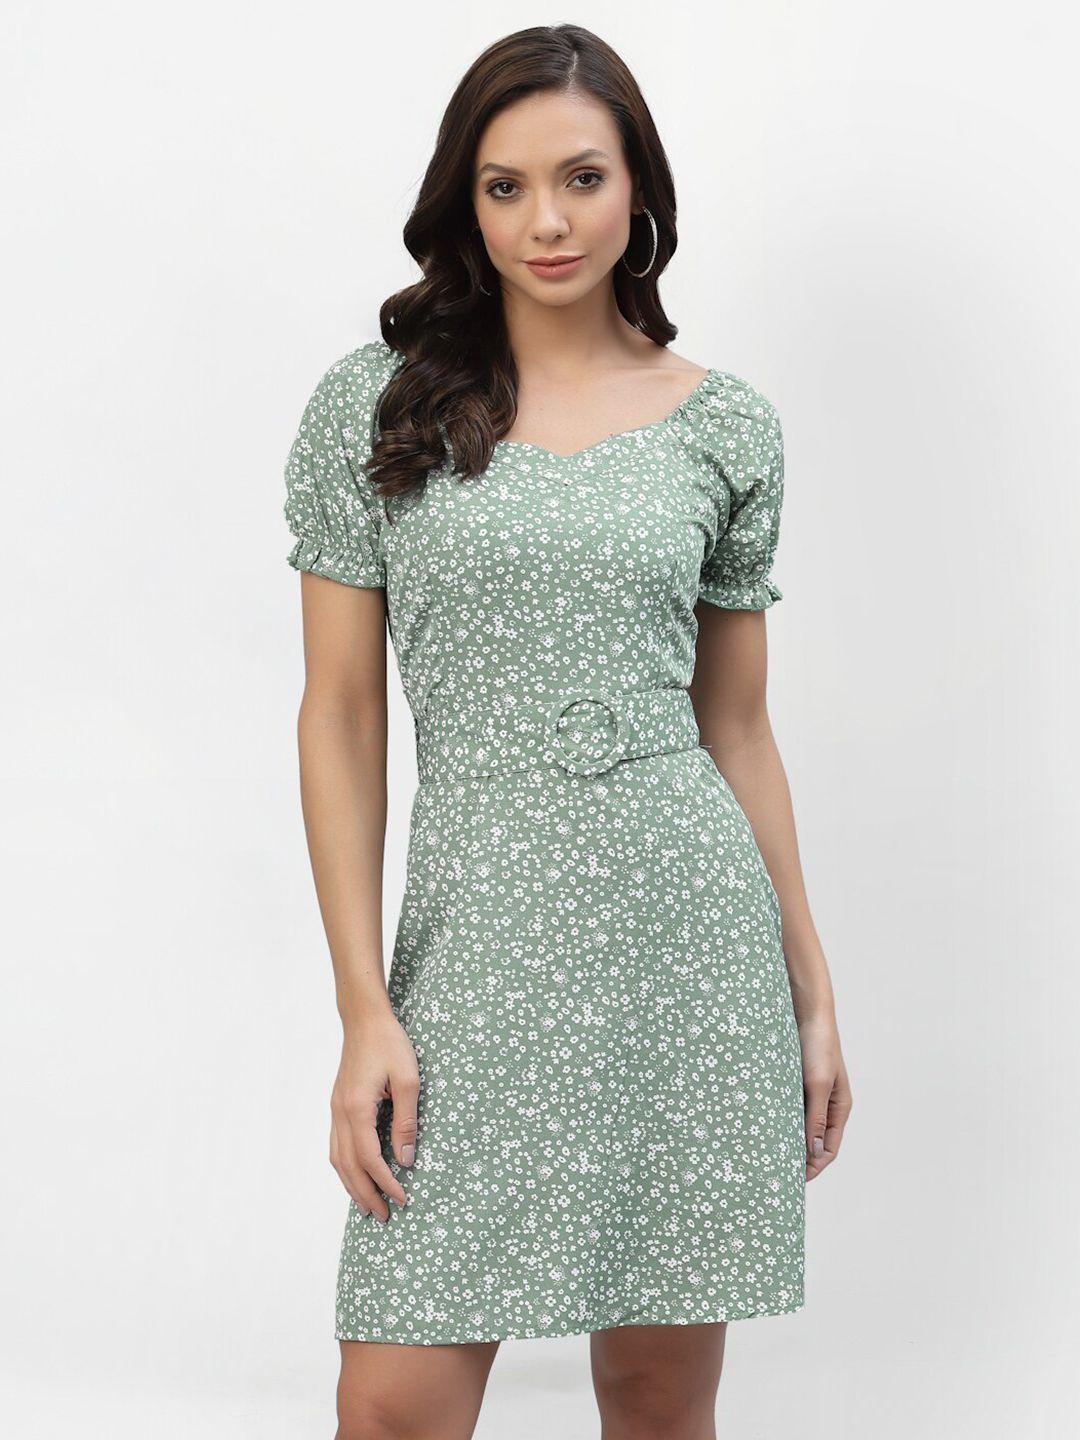 aayu women green floral crepe a-line dress